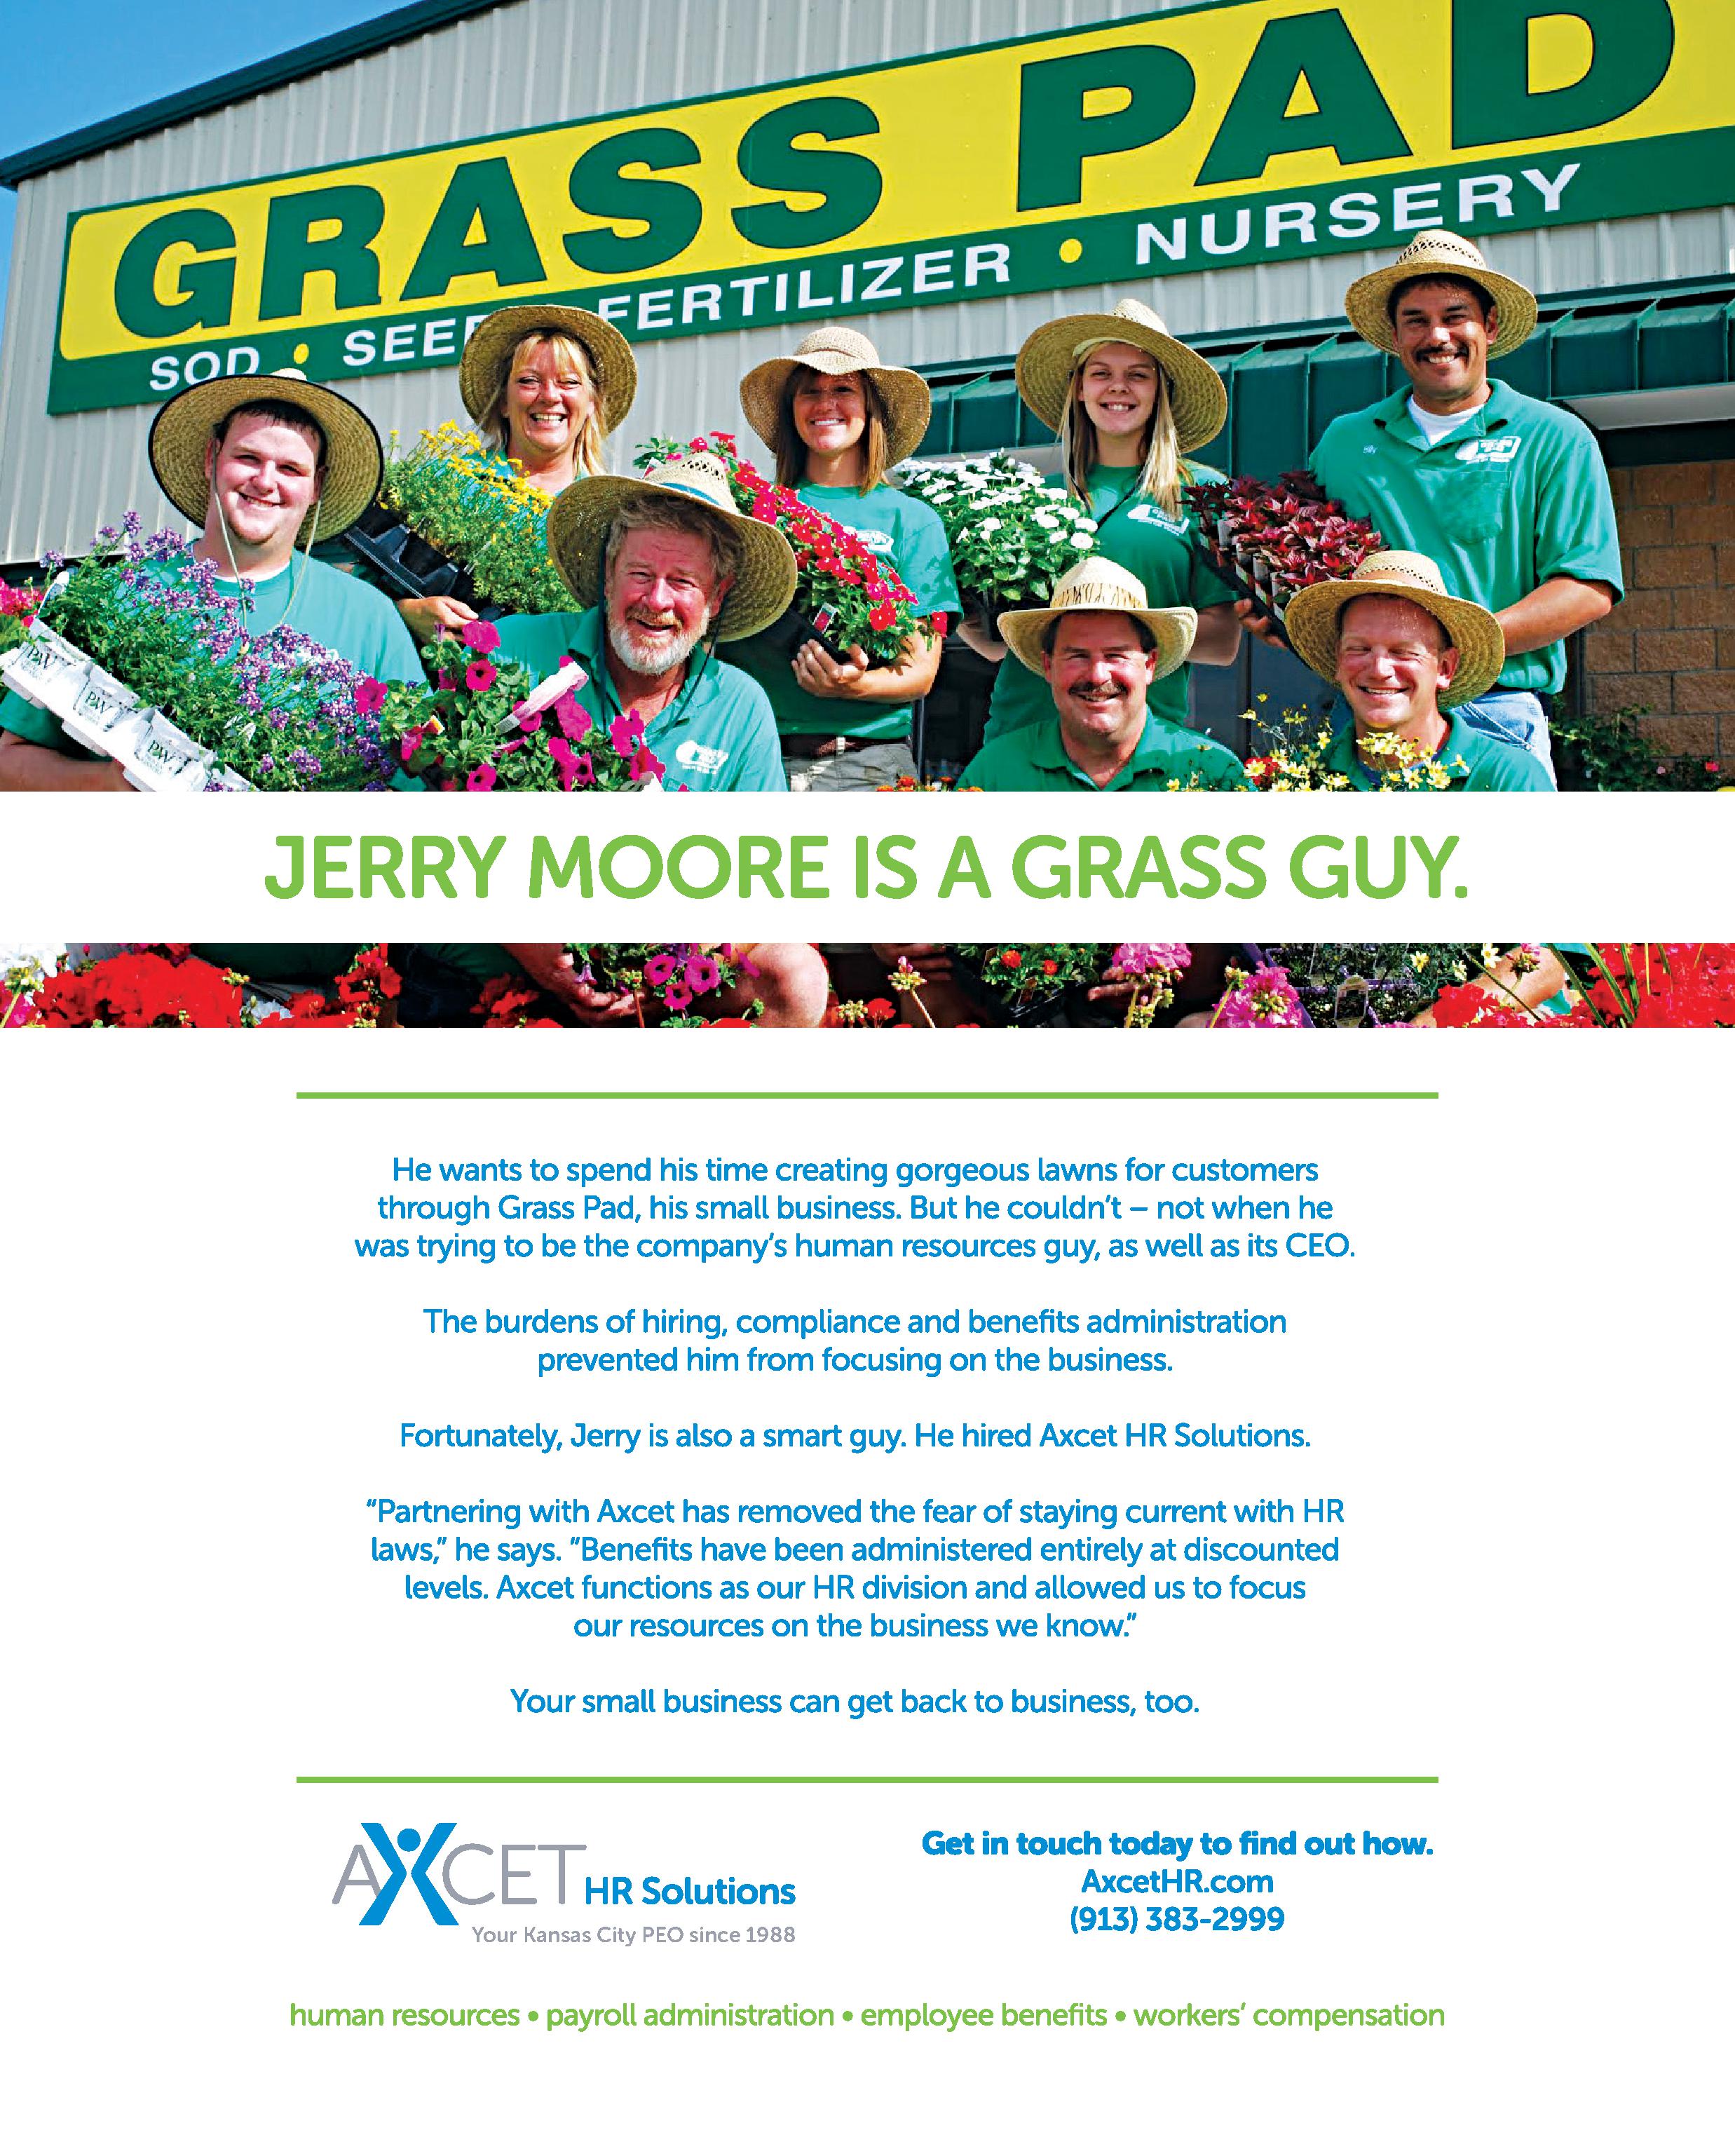 Jerry Moore, CEO of Grass Pad, is a Grass Guy